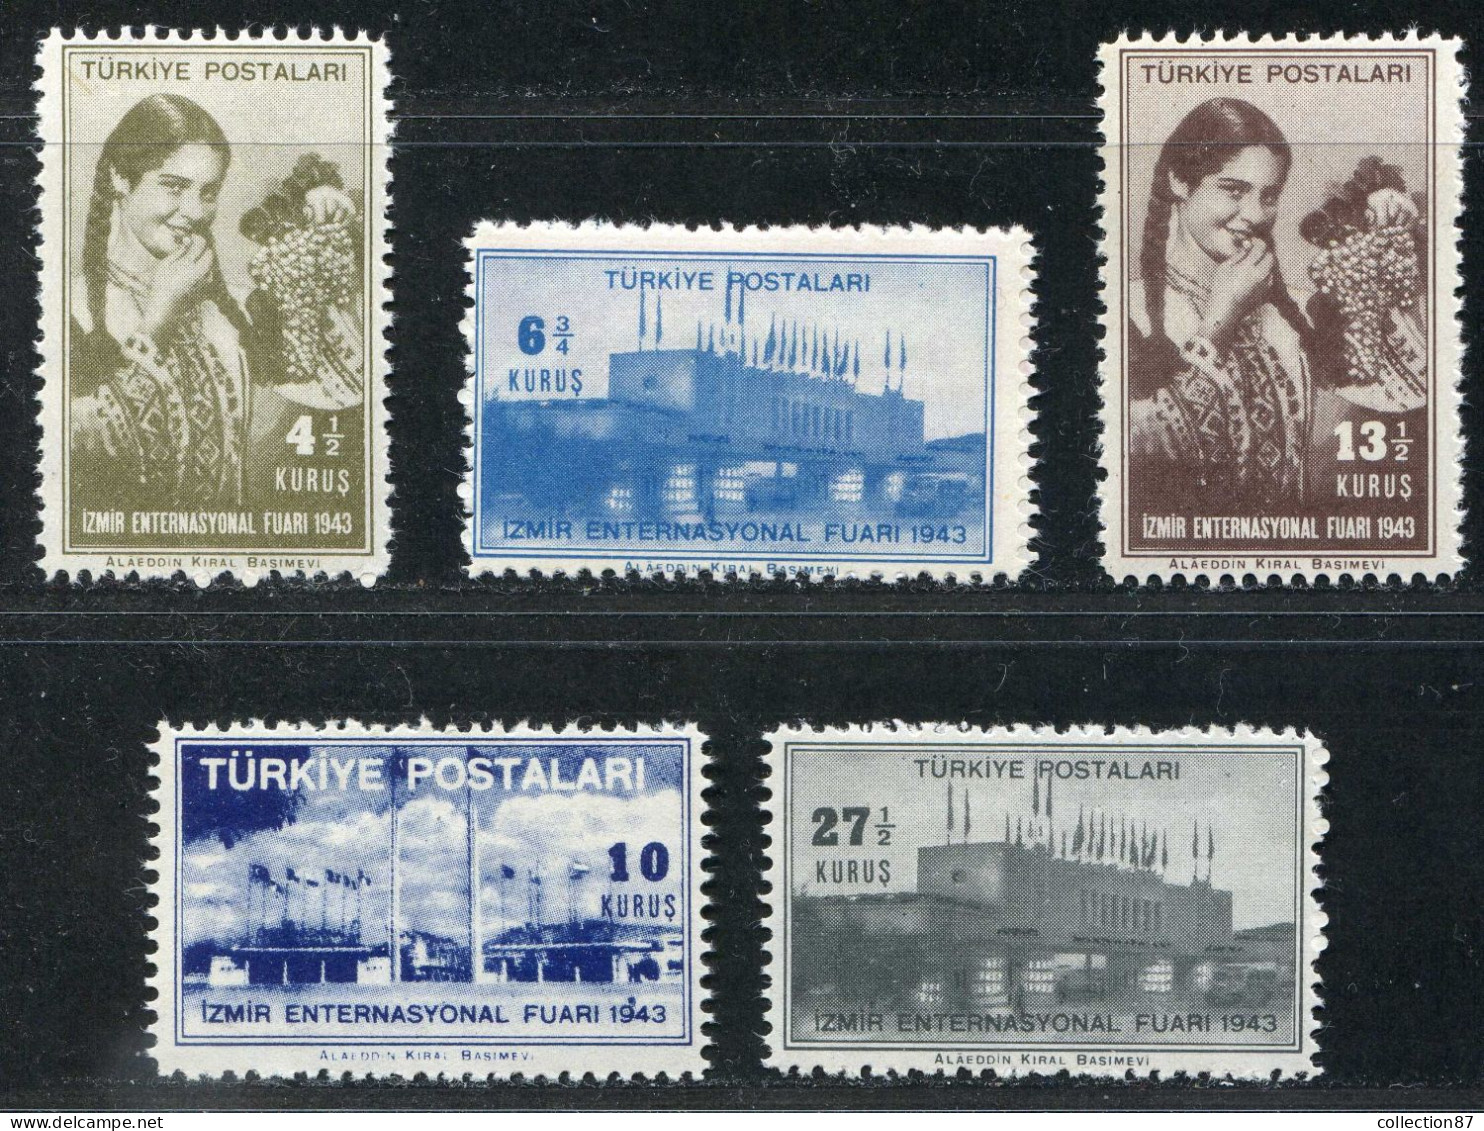 REF 091 > TURQUIE < Yv N° 1014 à 1019 * * < Neuf Luxe Dos Visible MNH * * > Foire Izmir - Nuovi